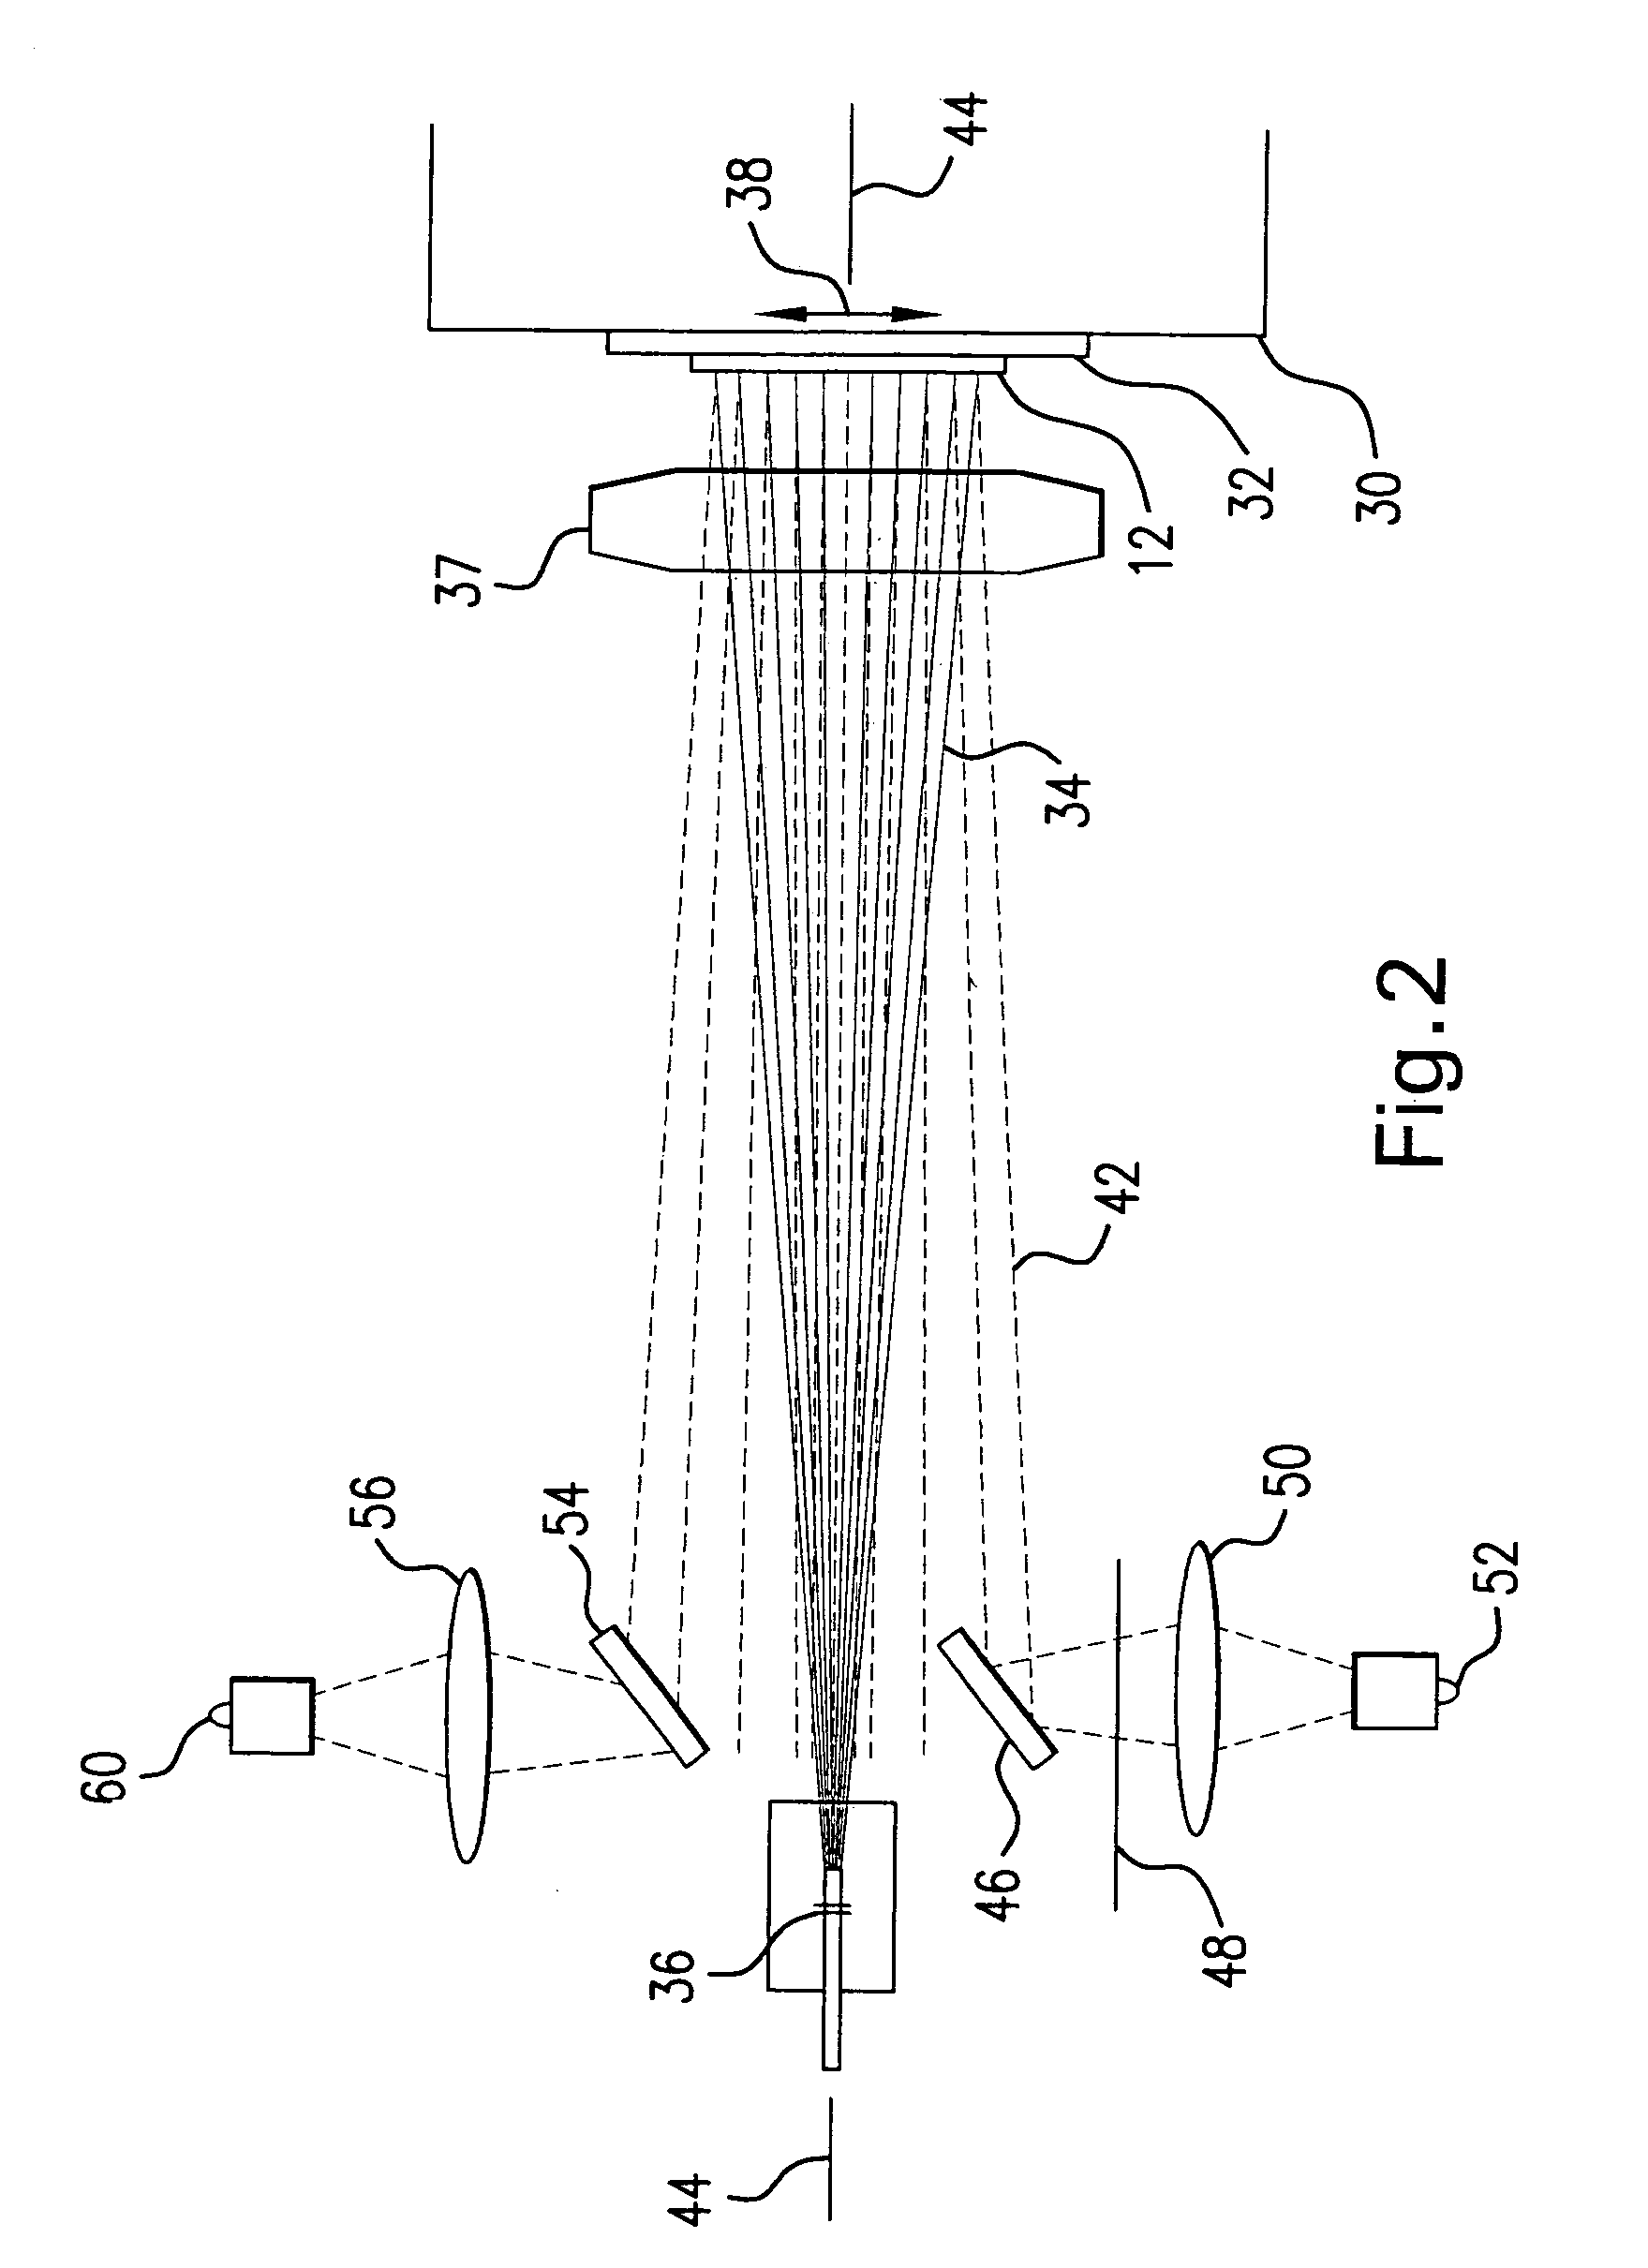 Systems and methods for implementing an interaction between a laser shaped as a line beam and a film deposited on a substrate